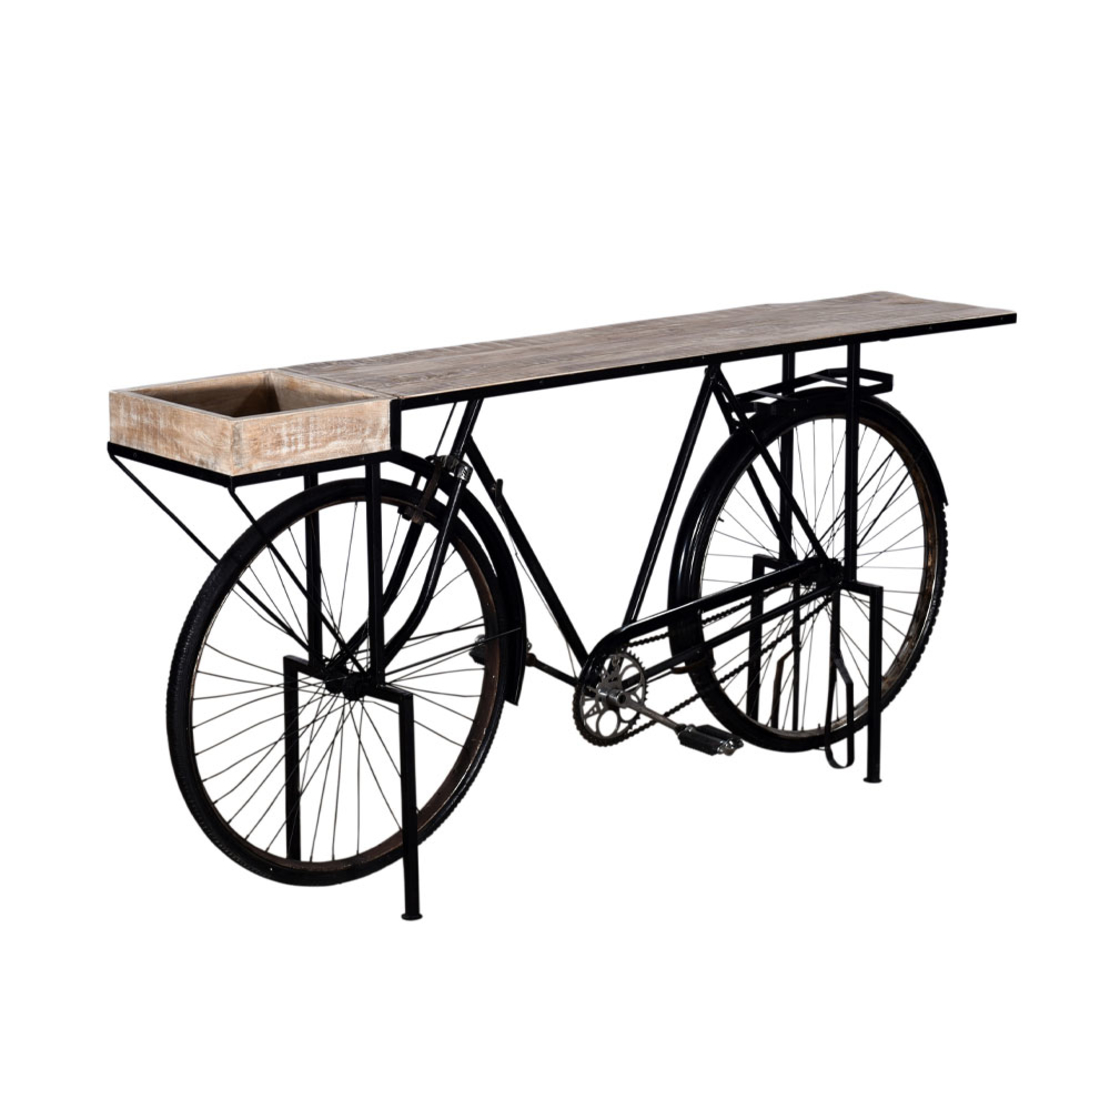 CYCLING CONSOLE METAL NATURAL BLACK 183x36xH84cm IN